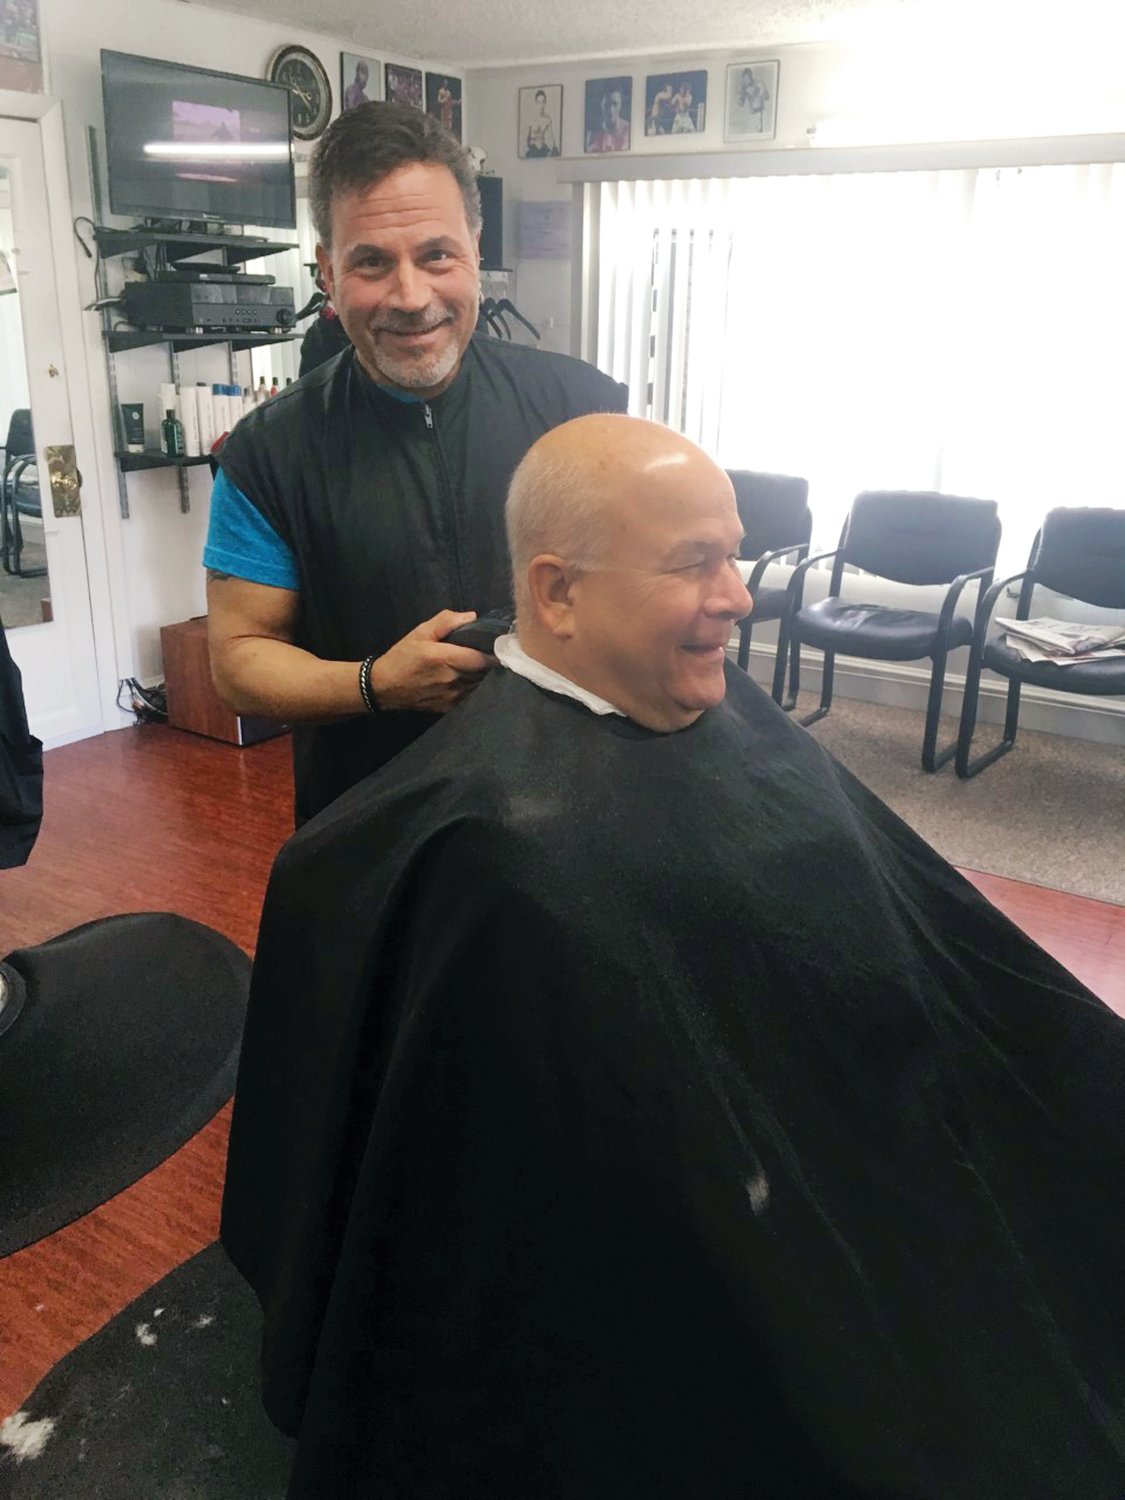 Dave Picozzi, the owner and namesake of David’s Greenwood Barber Shop on Post Road is as busy as ever making his longtime and loyal customers look and feel the very best.